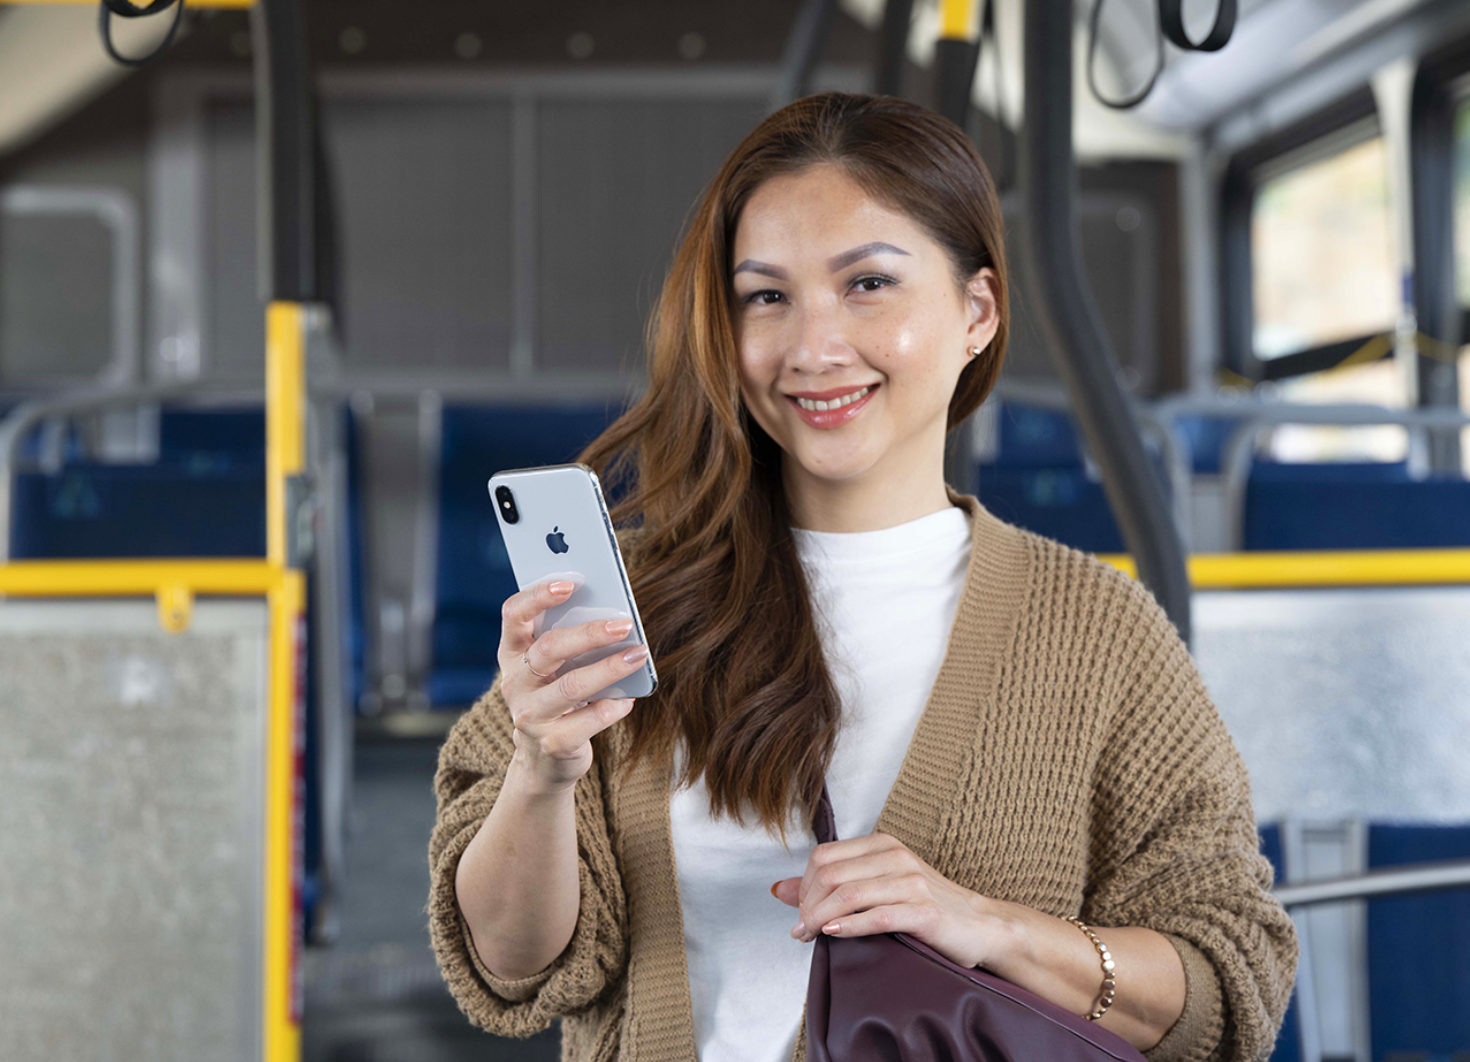 OC Bus rider standing on bus, smiling and holding smartphone